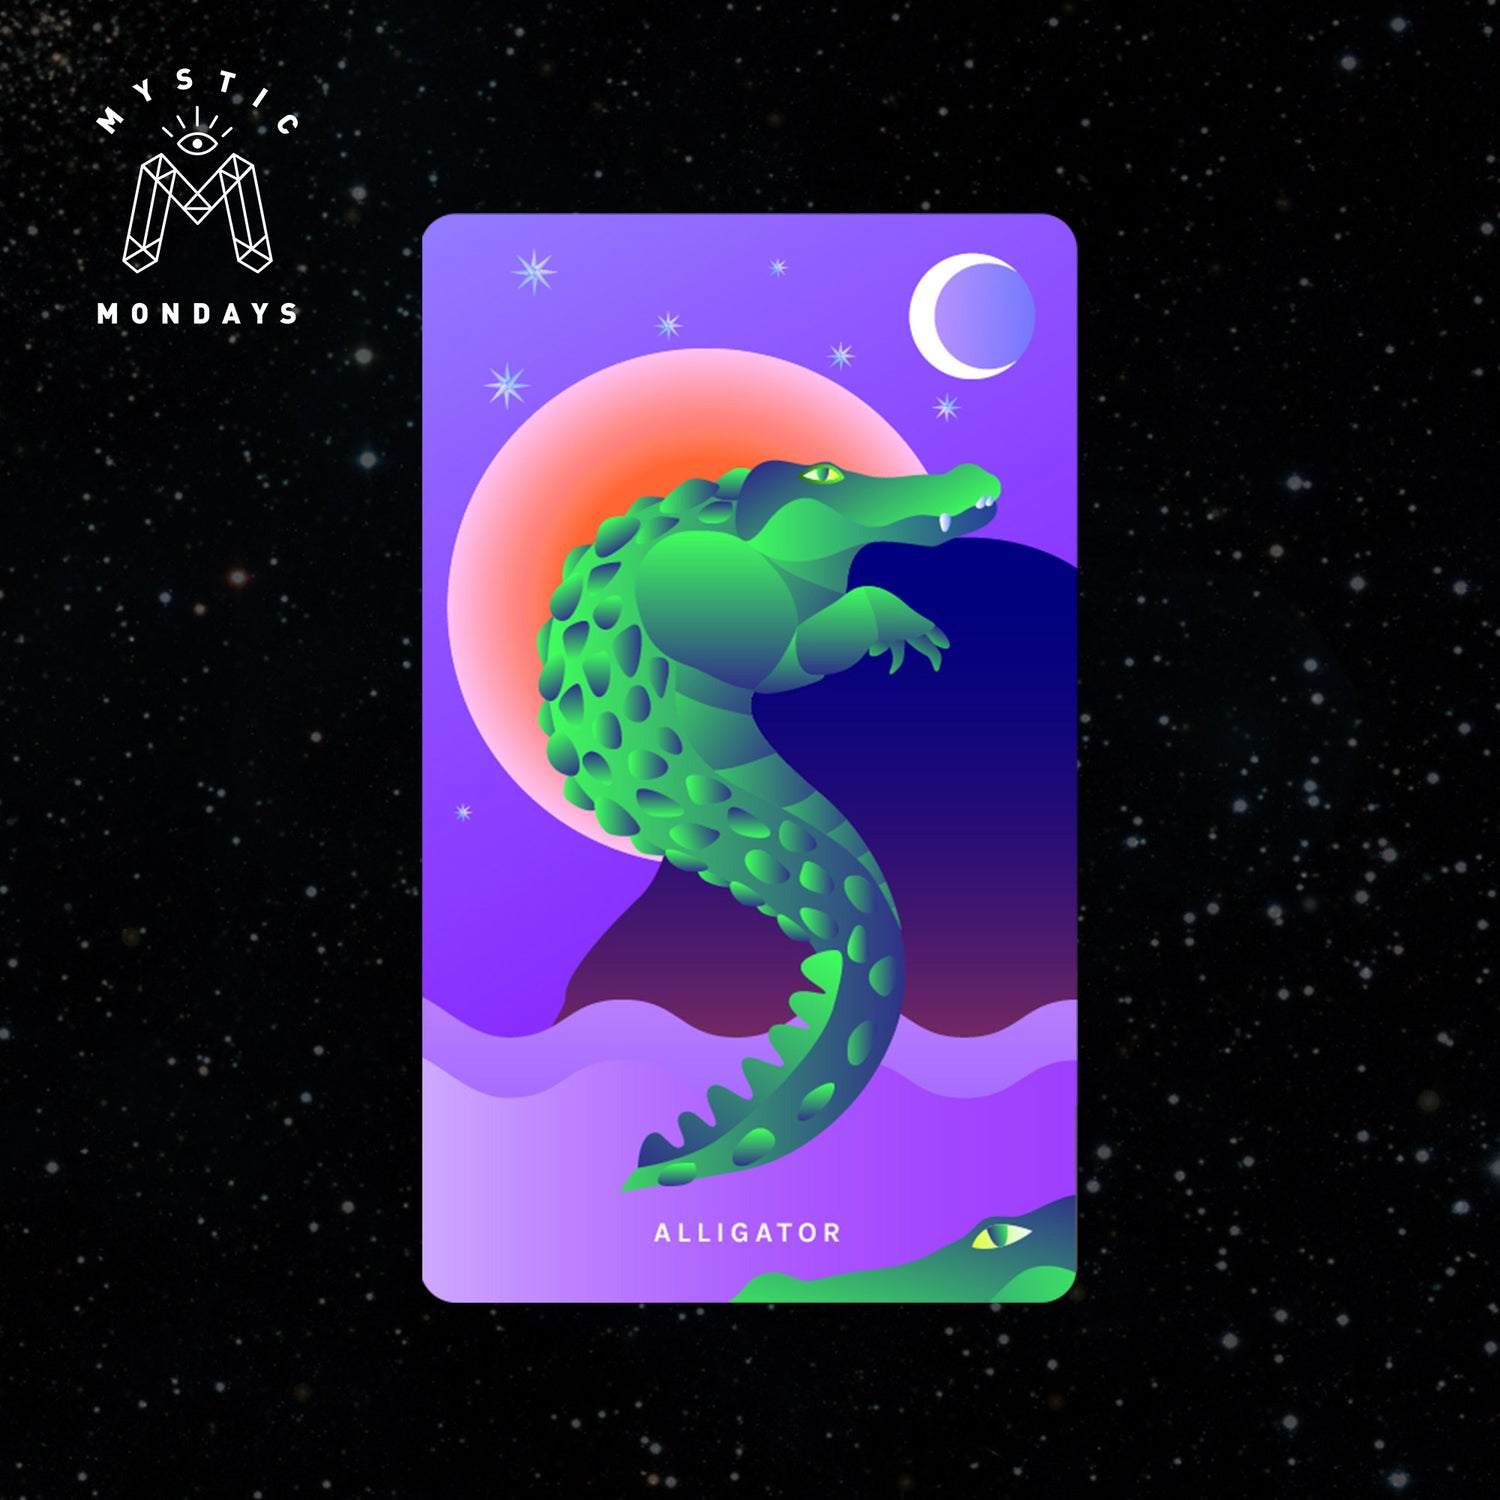 Alligator Cosmic Creatures Card Cheat Sheet Reference Guide